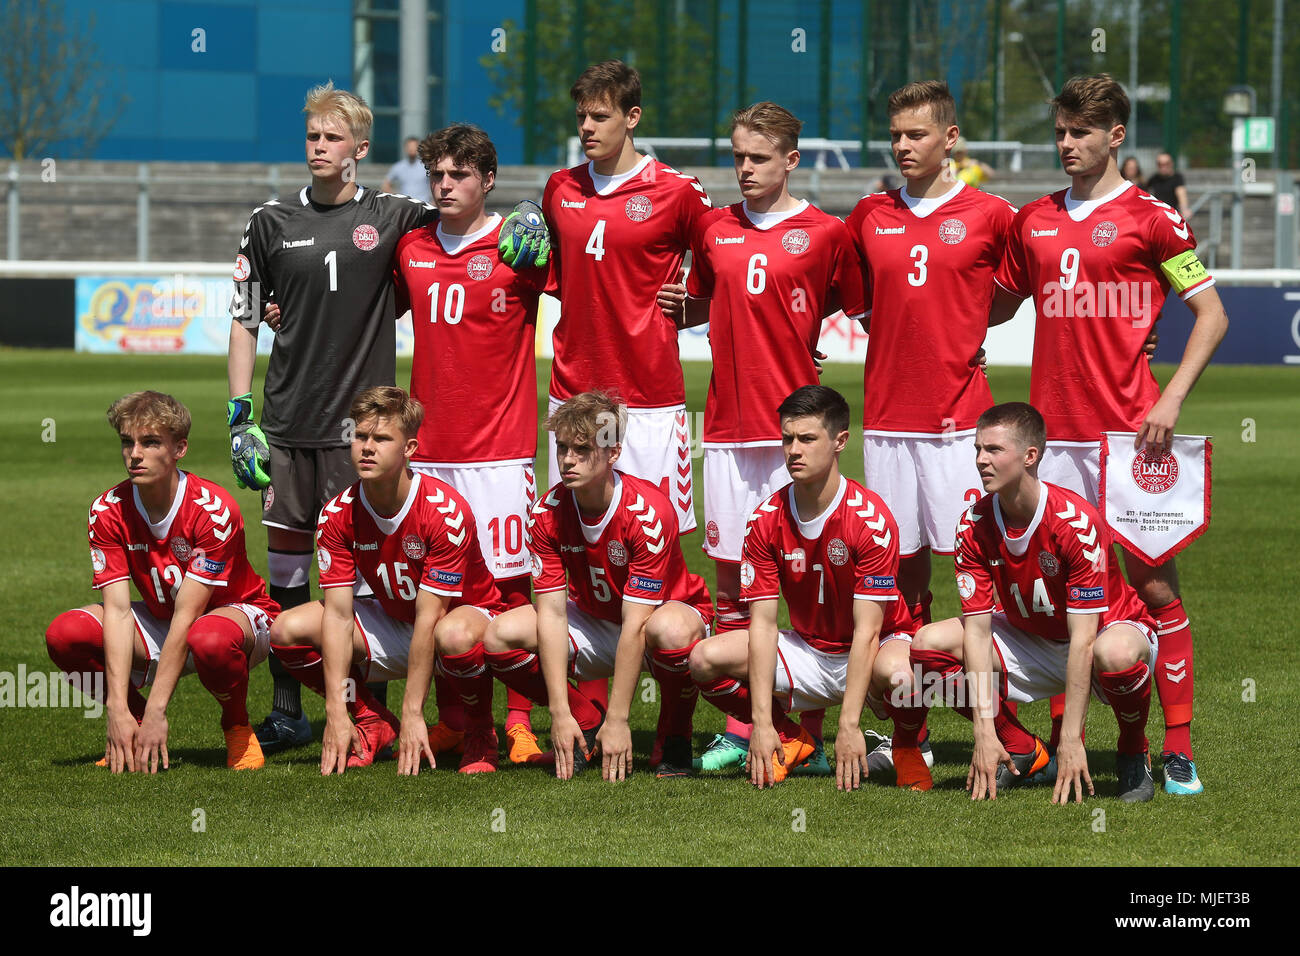 Loughborough, UK. 5th May, 2018. The Danish team line up before the 2018 UEFA European Under-17 Championship Group C match between Denmark and Bosnia and Herzegovina at Loughborough University Stadium on May 5th 2018 in Loughborough, England. (Photo by Paul Chesterton/phcimages.com) Credit: PHC Images/Alamy Live News Stock Photo